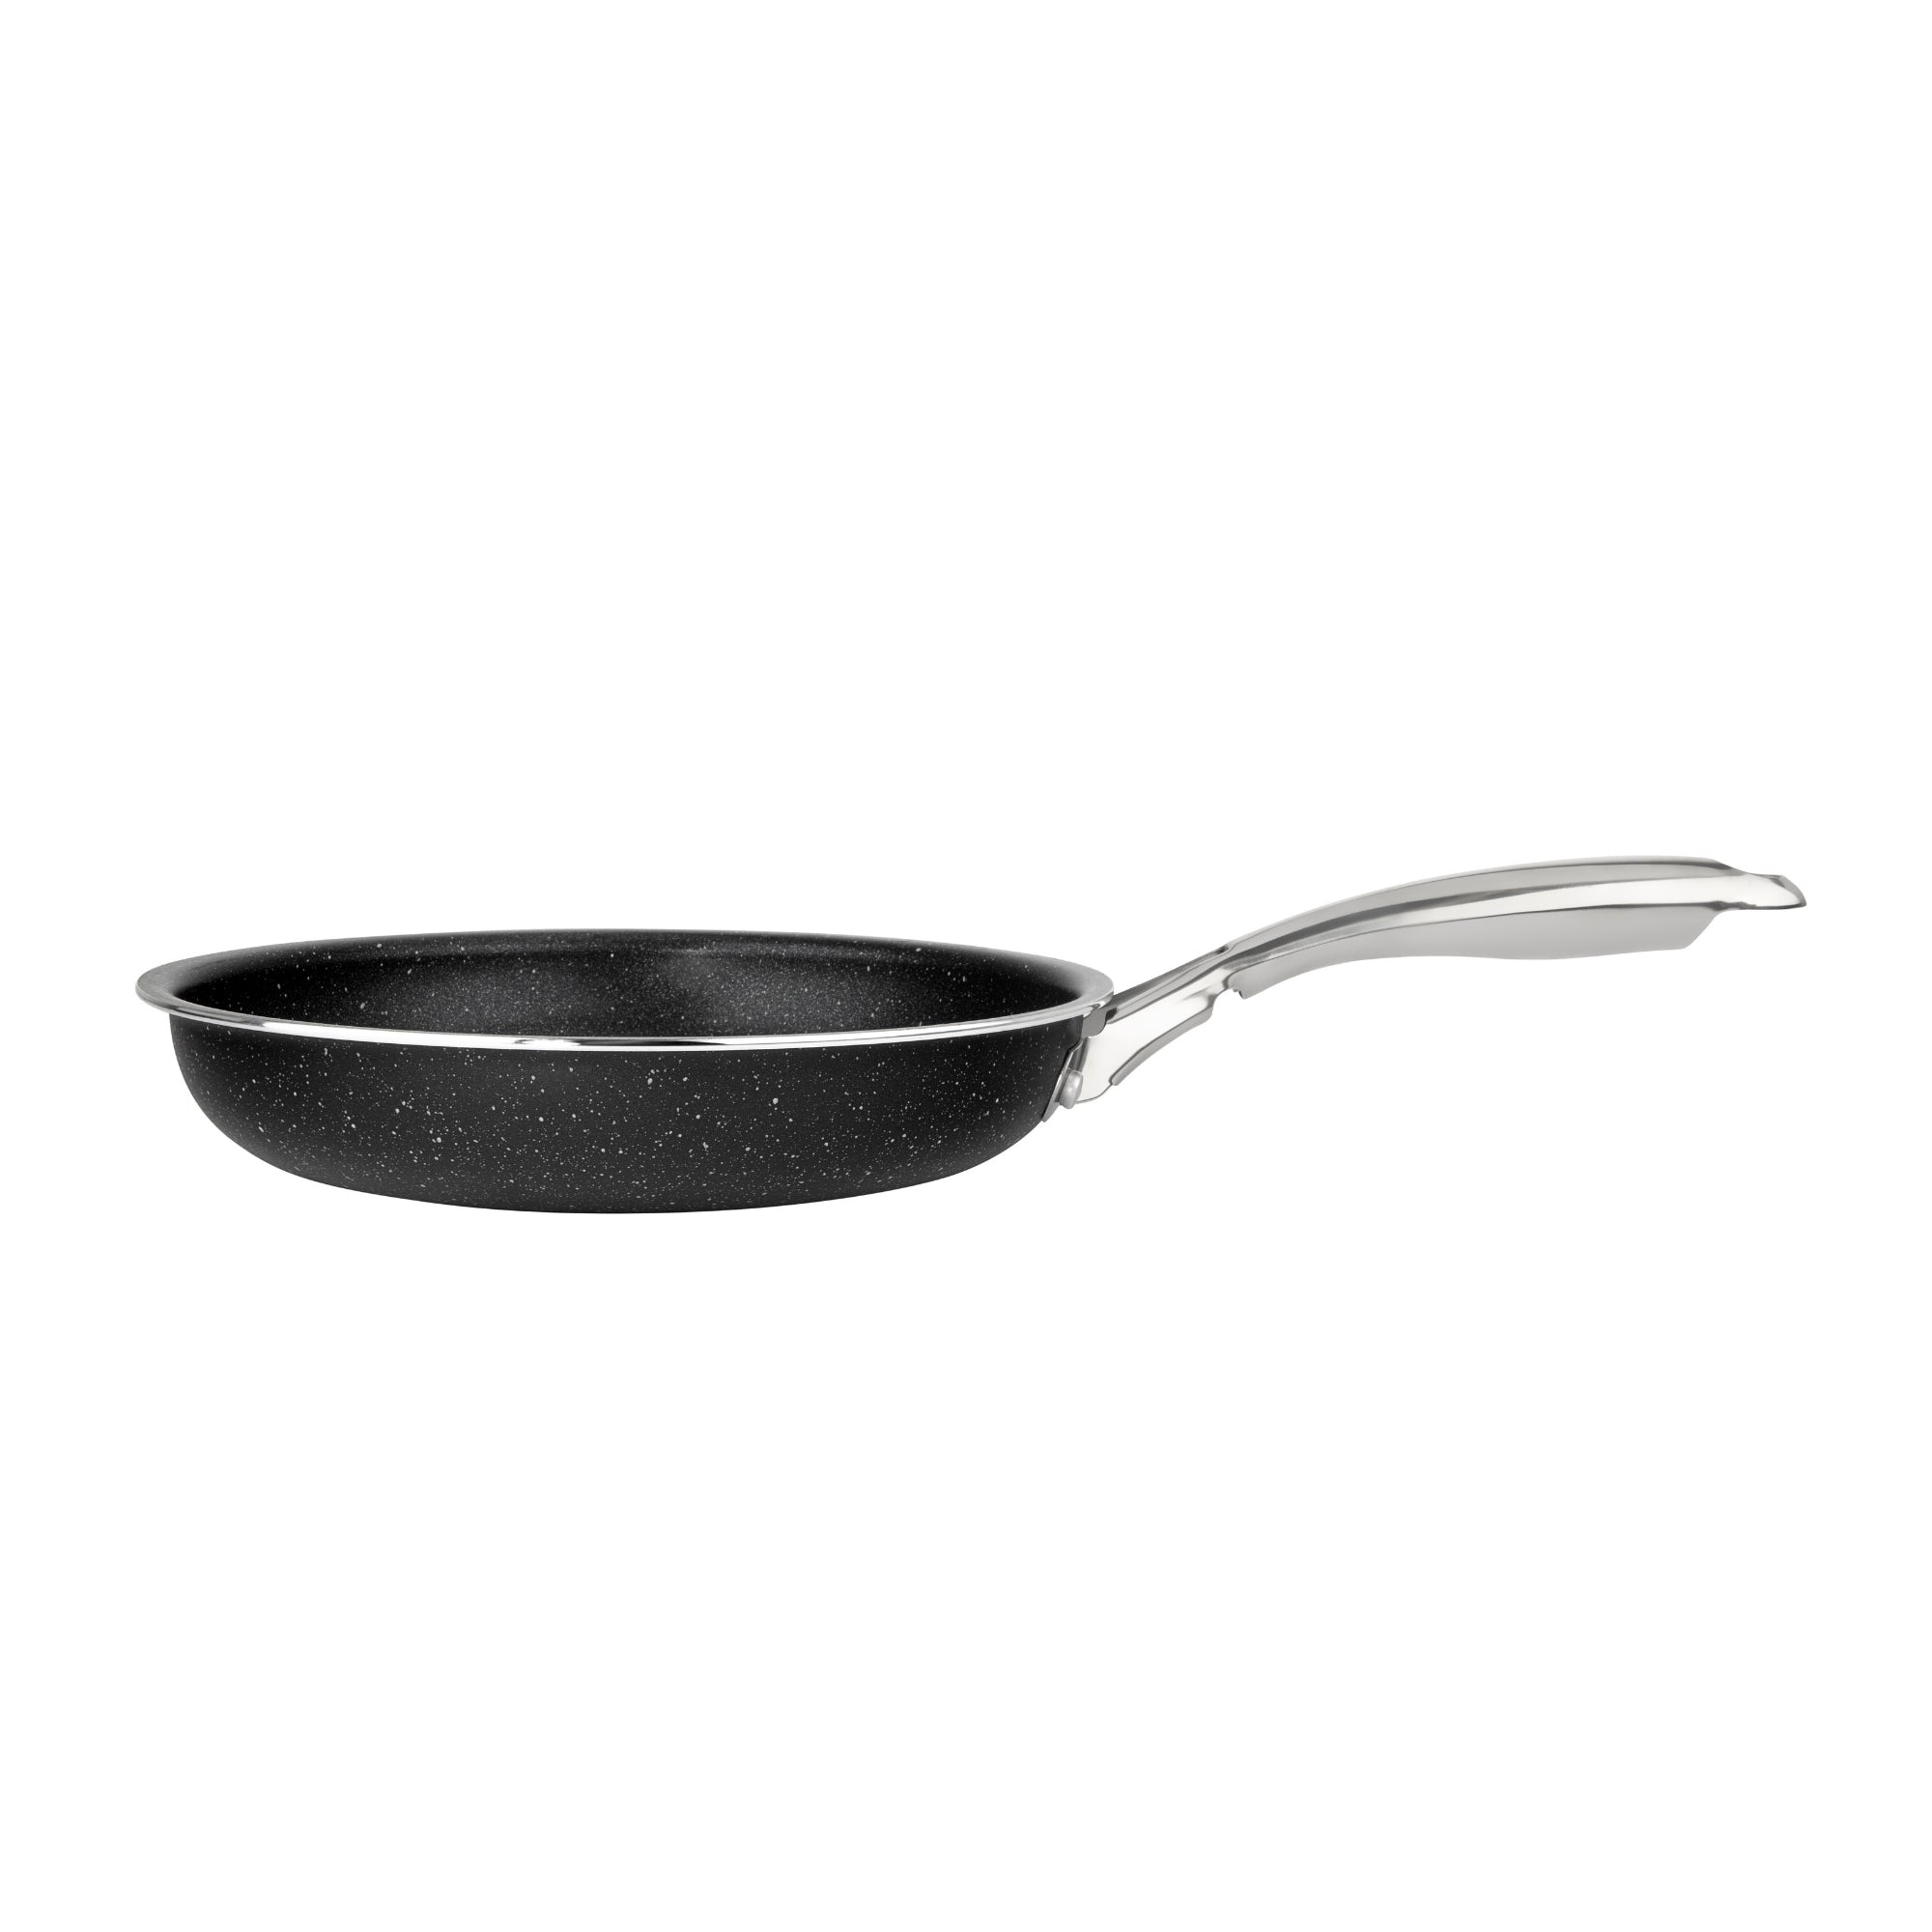 As Seen On TV 8702 Slip Stone Cookware Non Stick Fry 10 